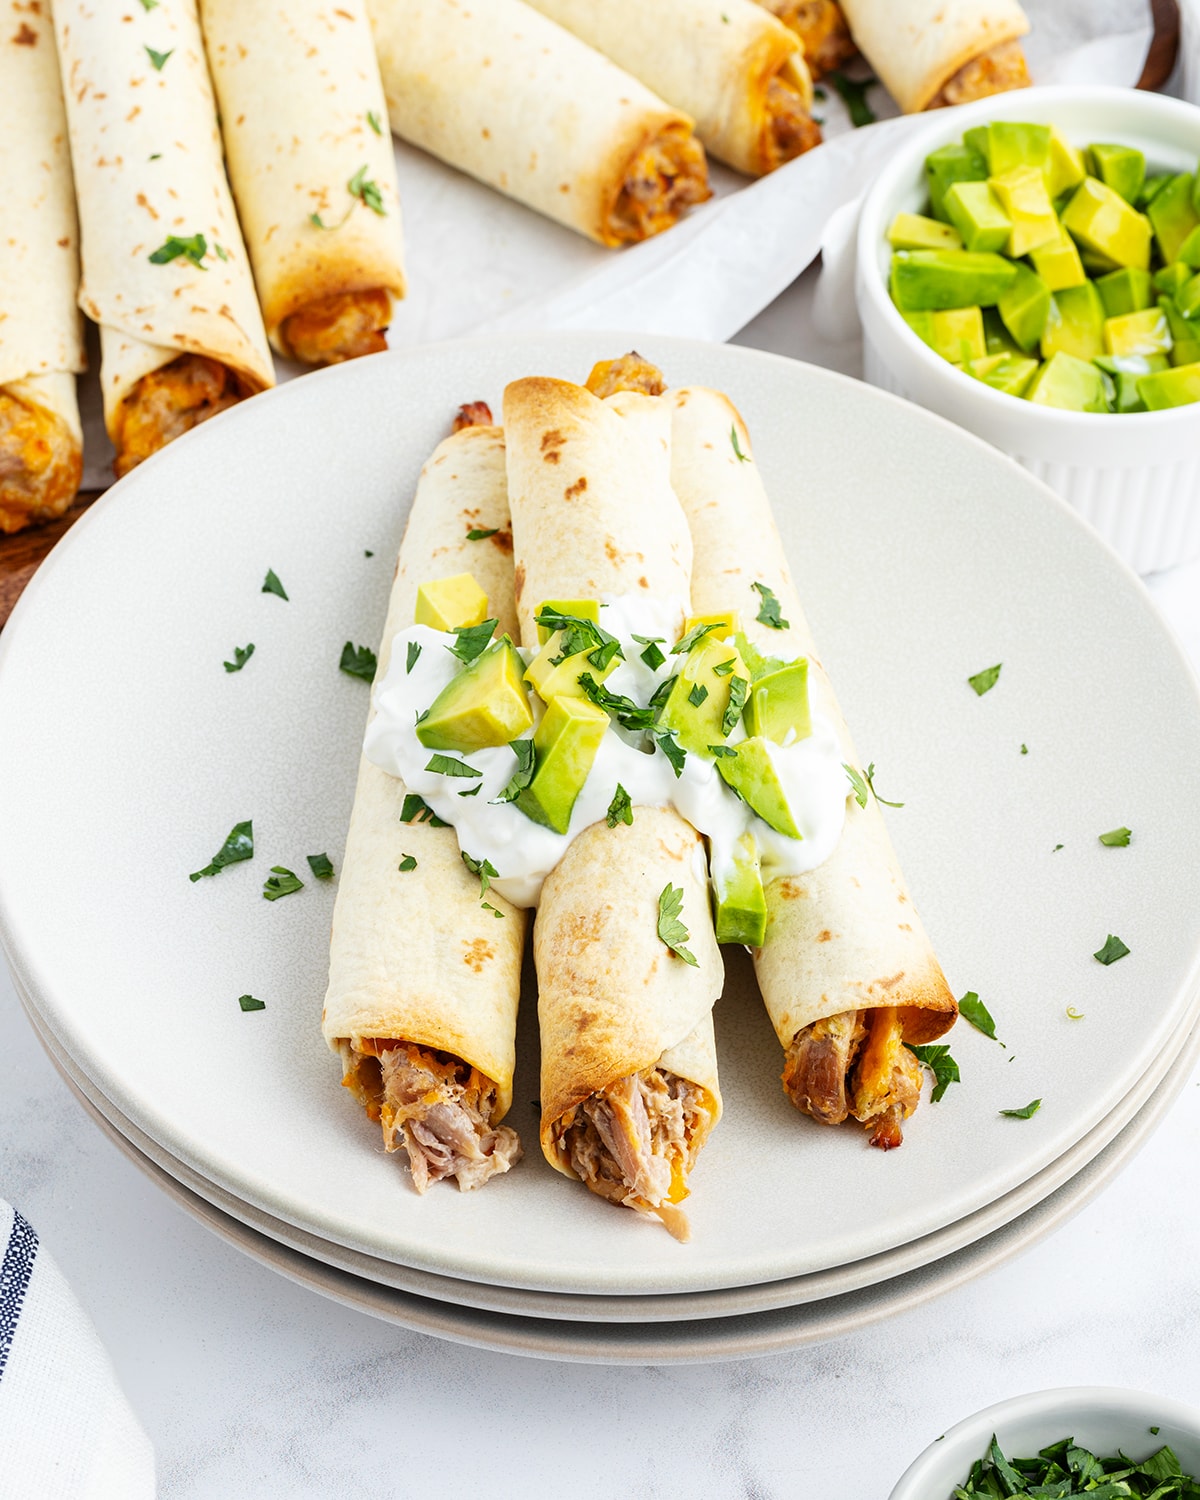 A plate of creamy pulled pork taquitos topped with sour cream and avocado pieces.